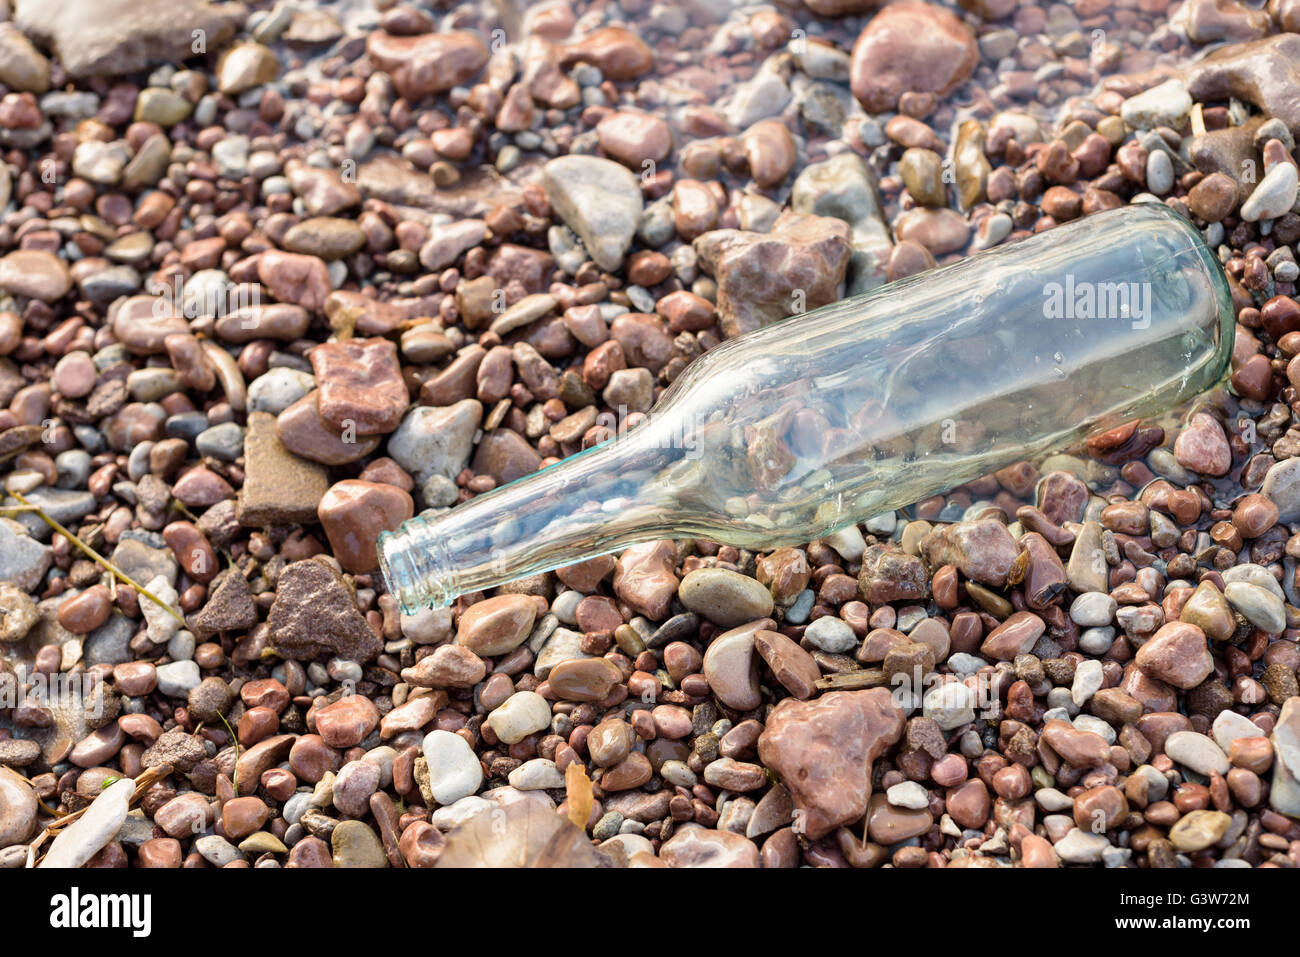 Single empty clear glass bottle on stones at the edge of the waterside. Stock Photo